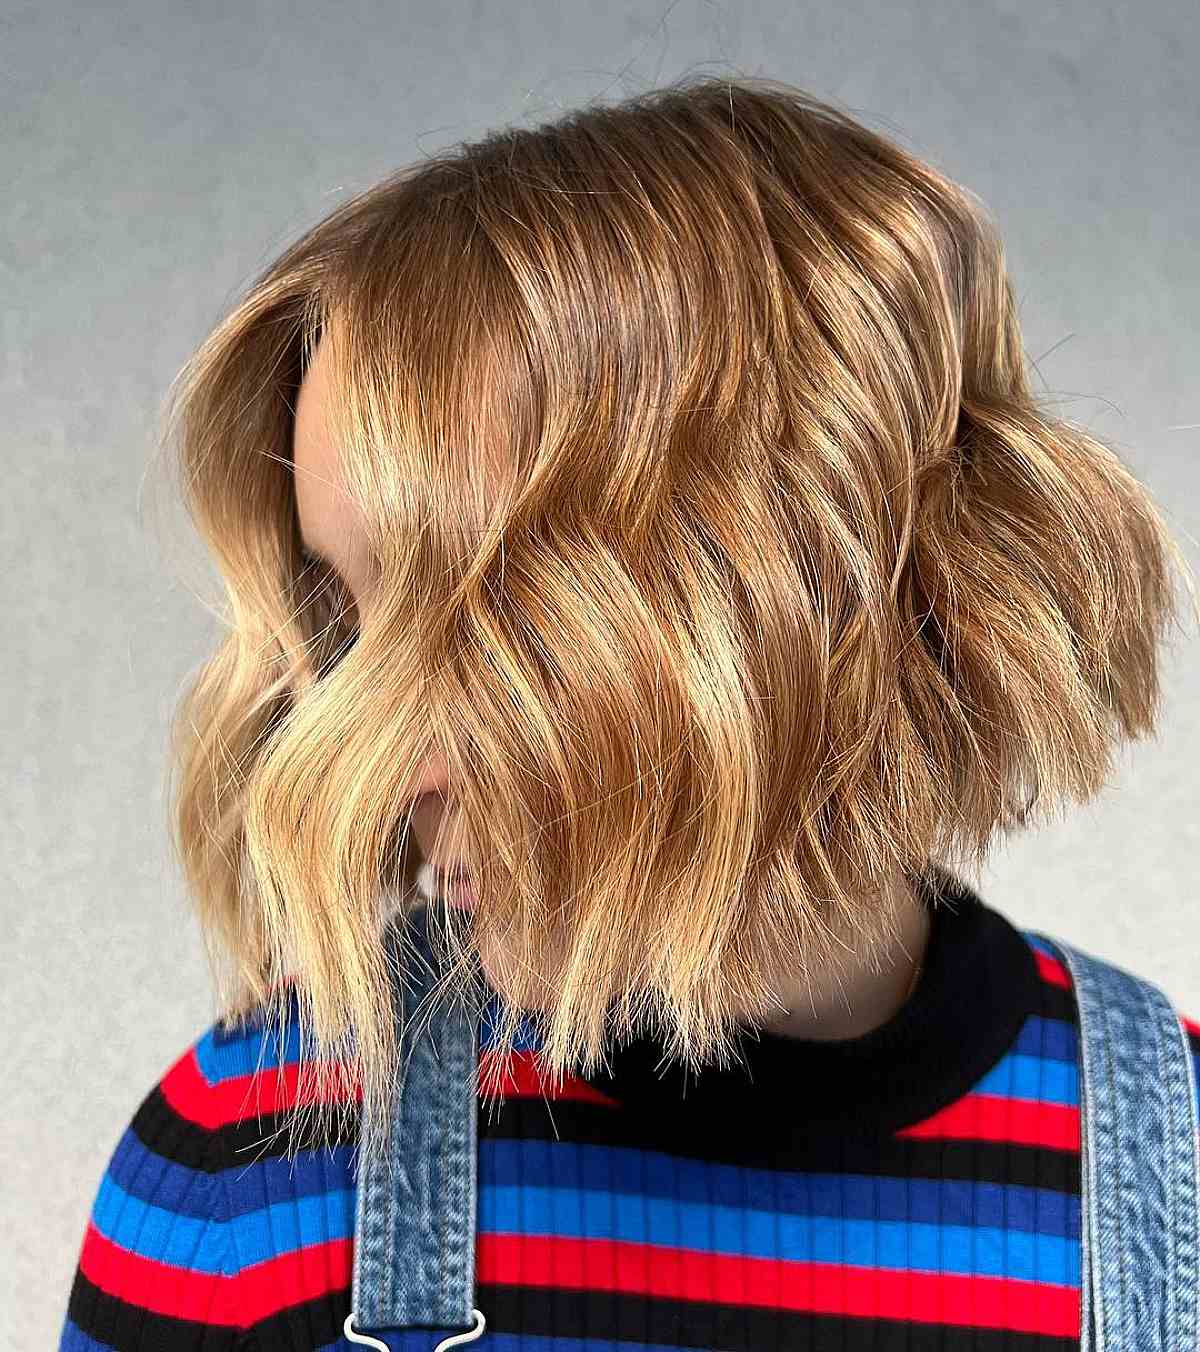 Wavy blonde bob with jagged ends of thick chin-length hair